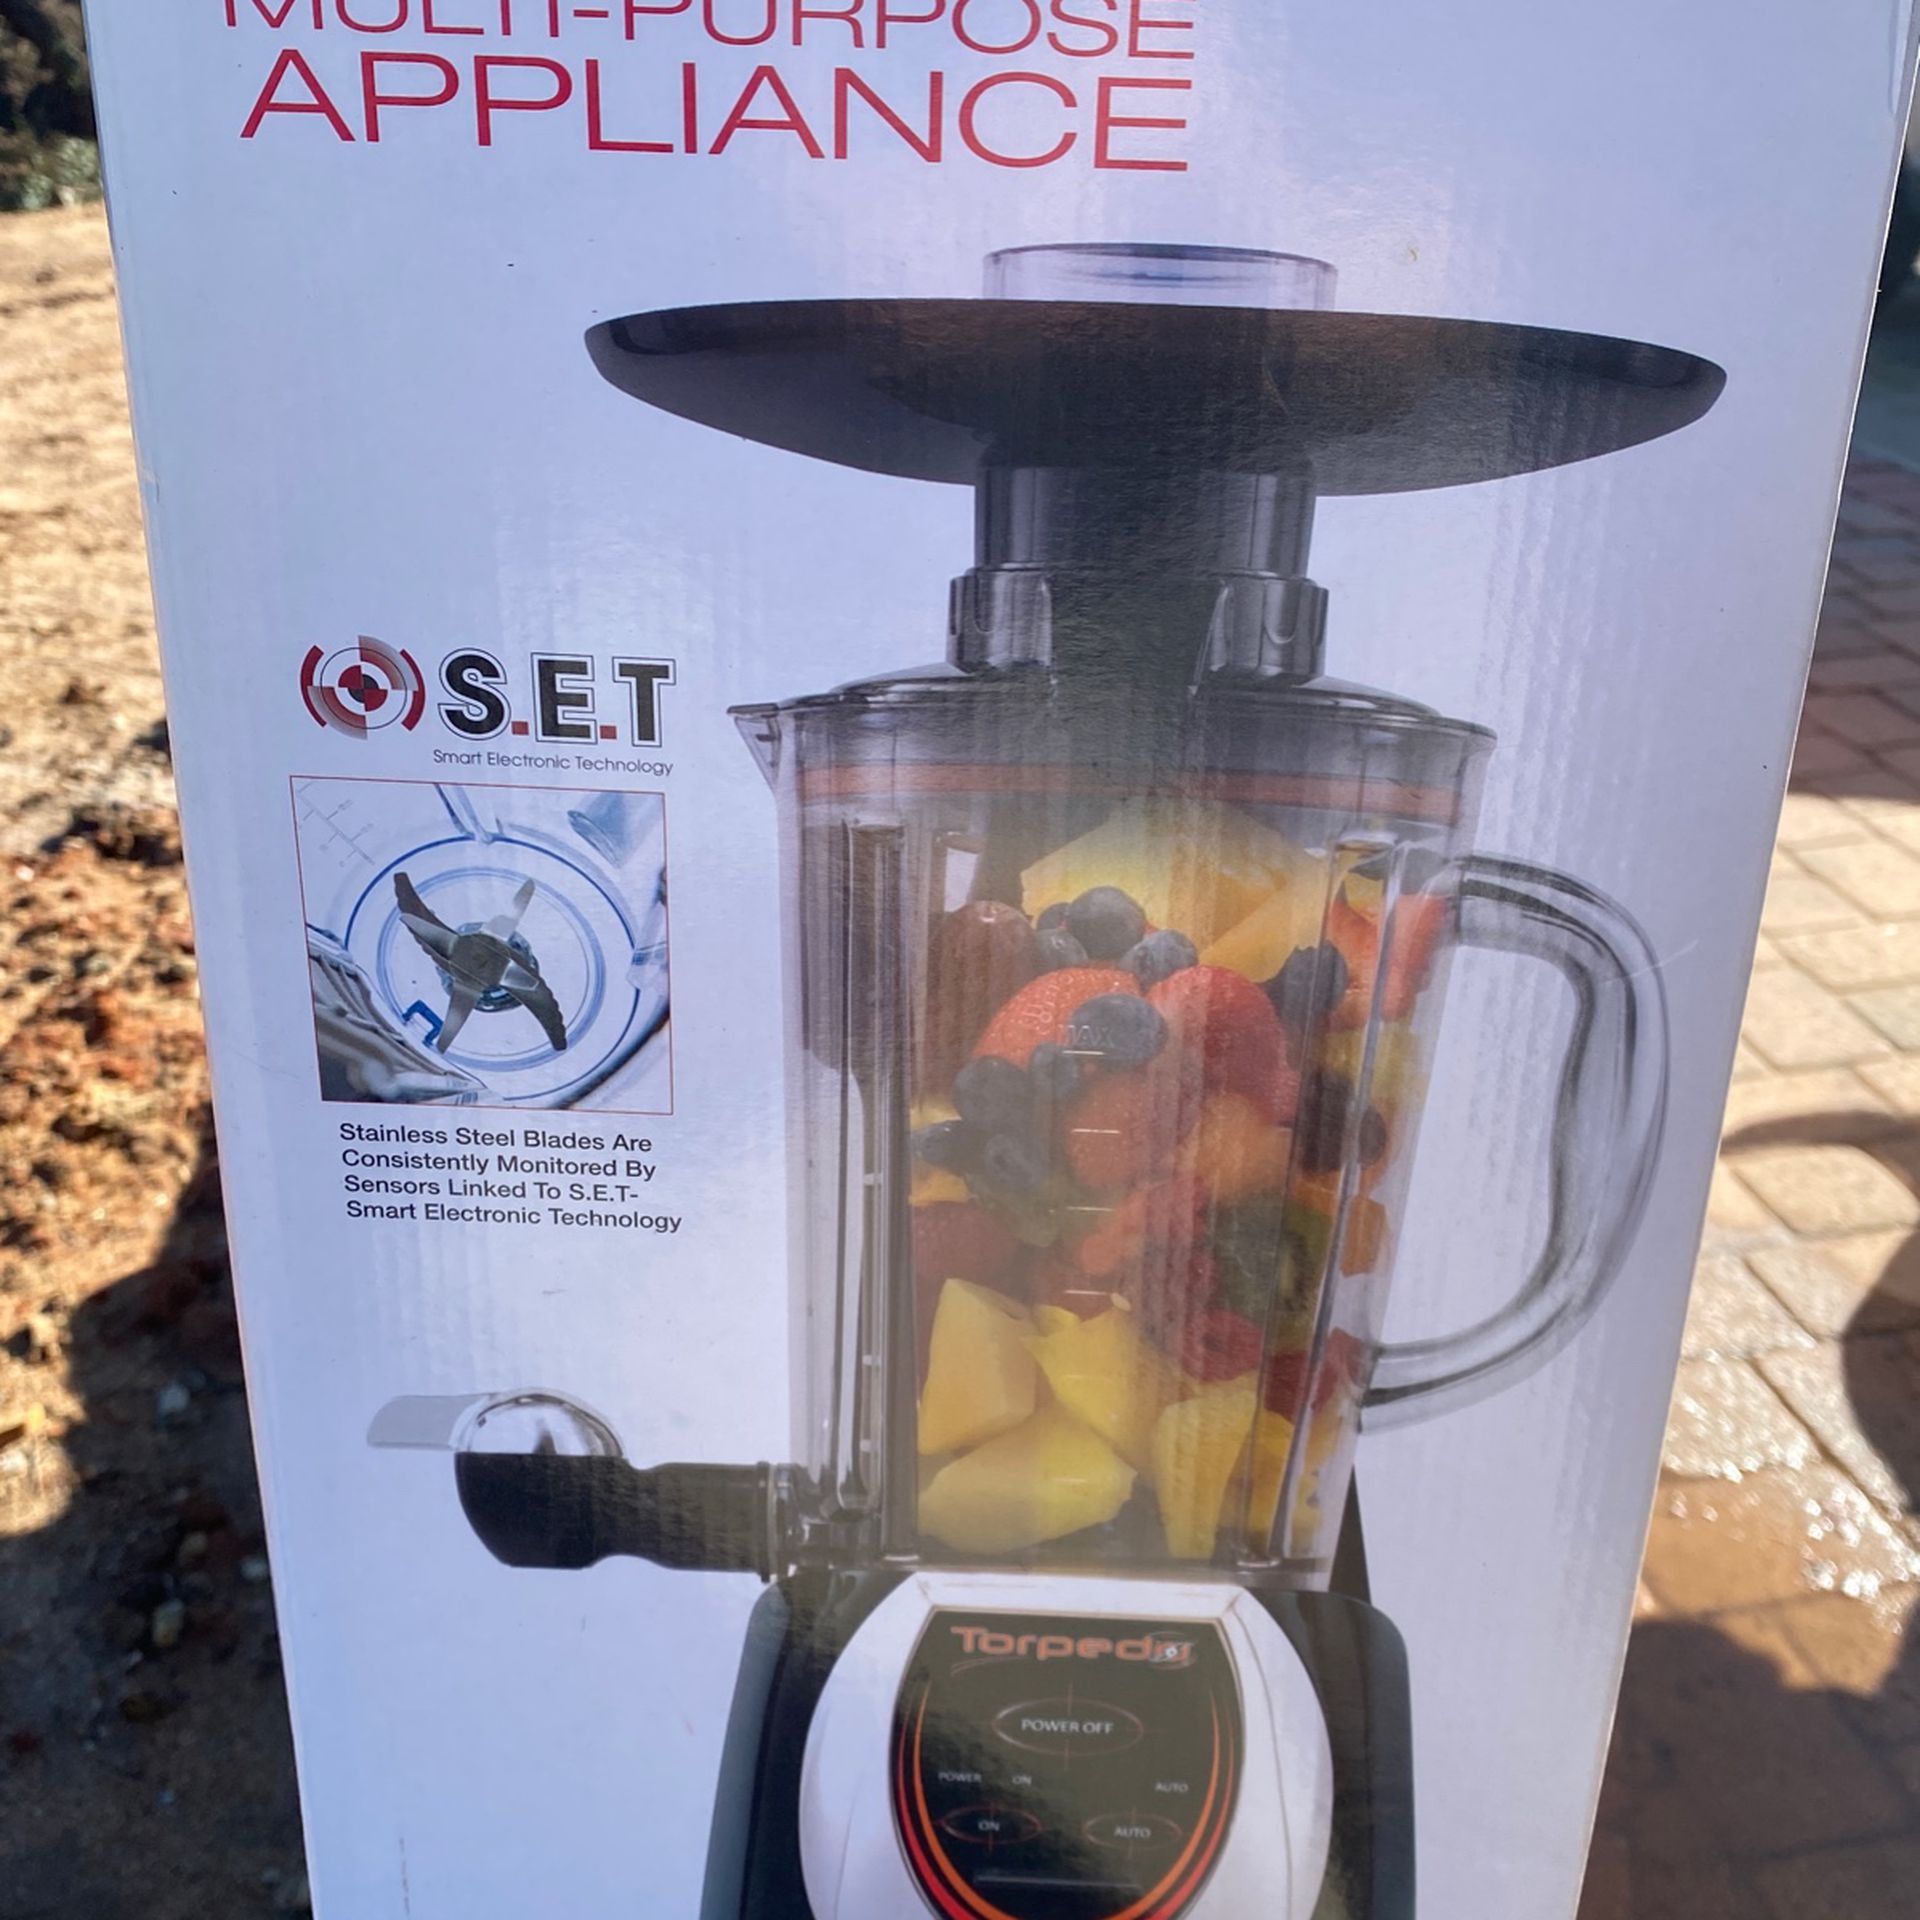 Toastmaster Personal Blender for Sale in Madera, CA - OfferUp